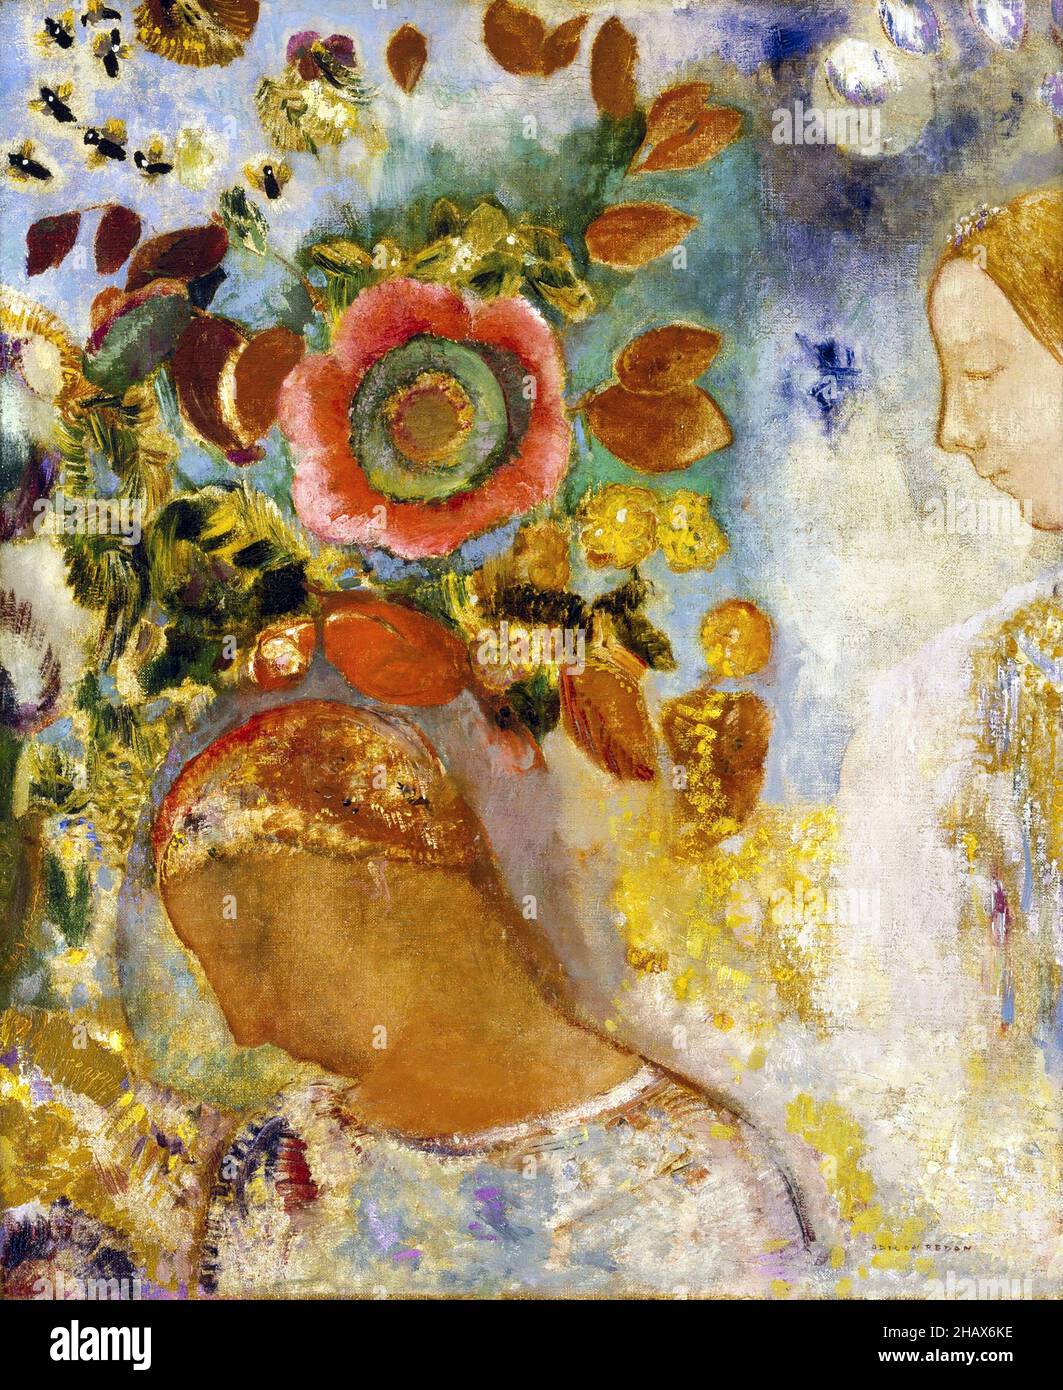 Two Young Girls among Flowers by Odilon Redon (1840-1916), oil on canvas, 1912 Stock Photo